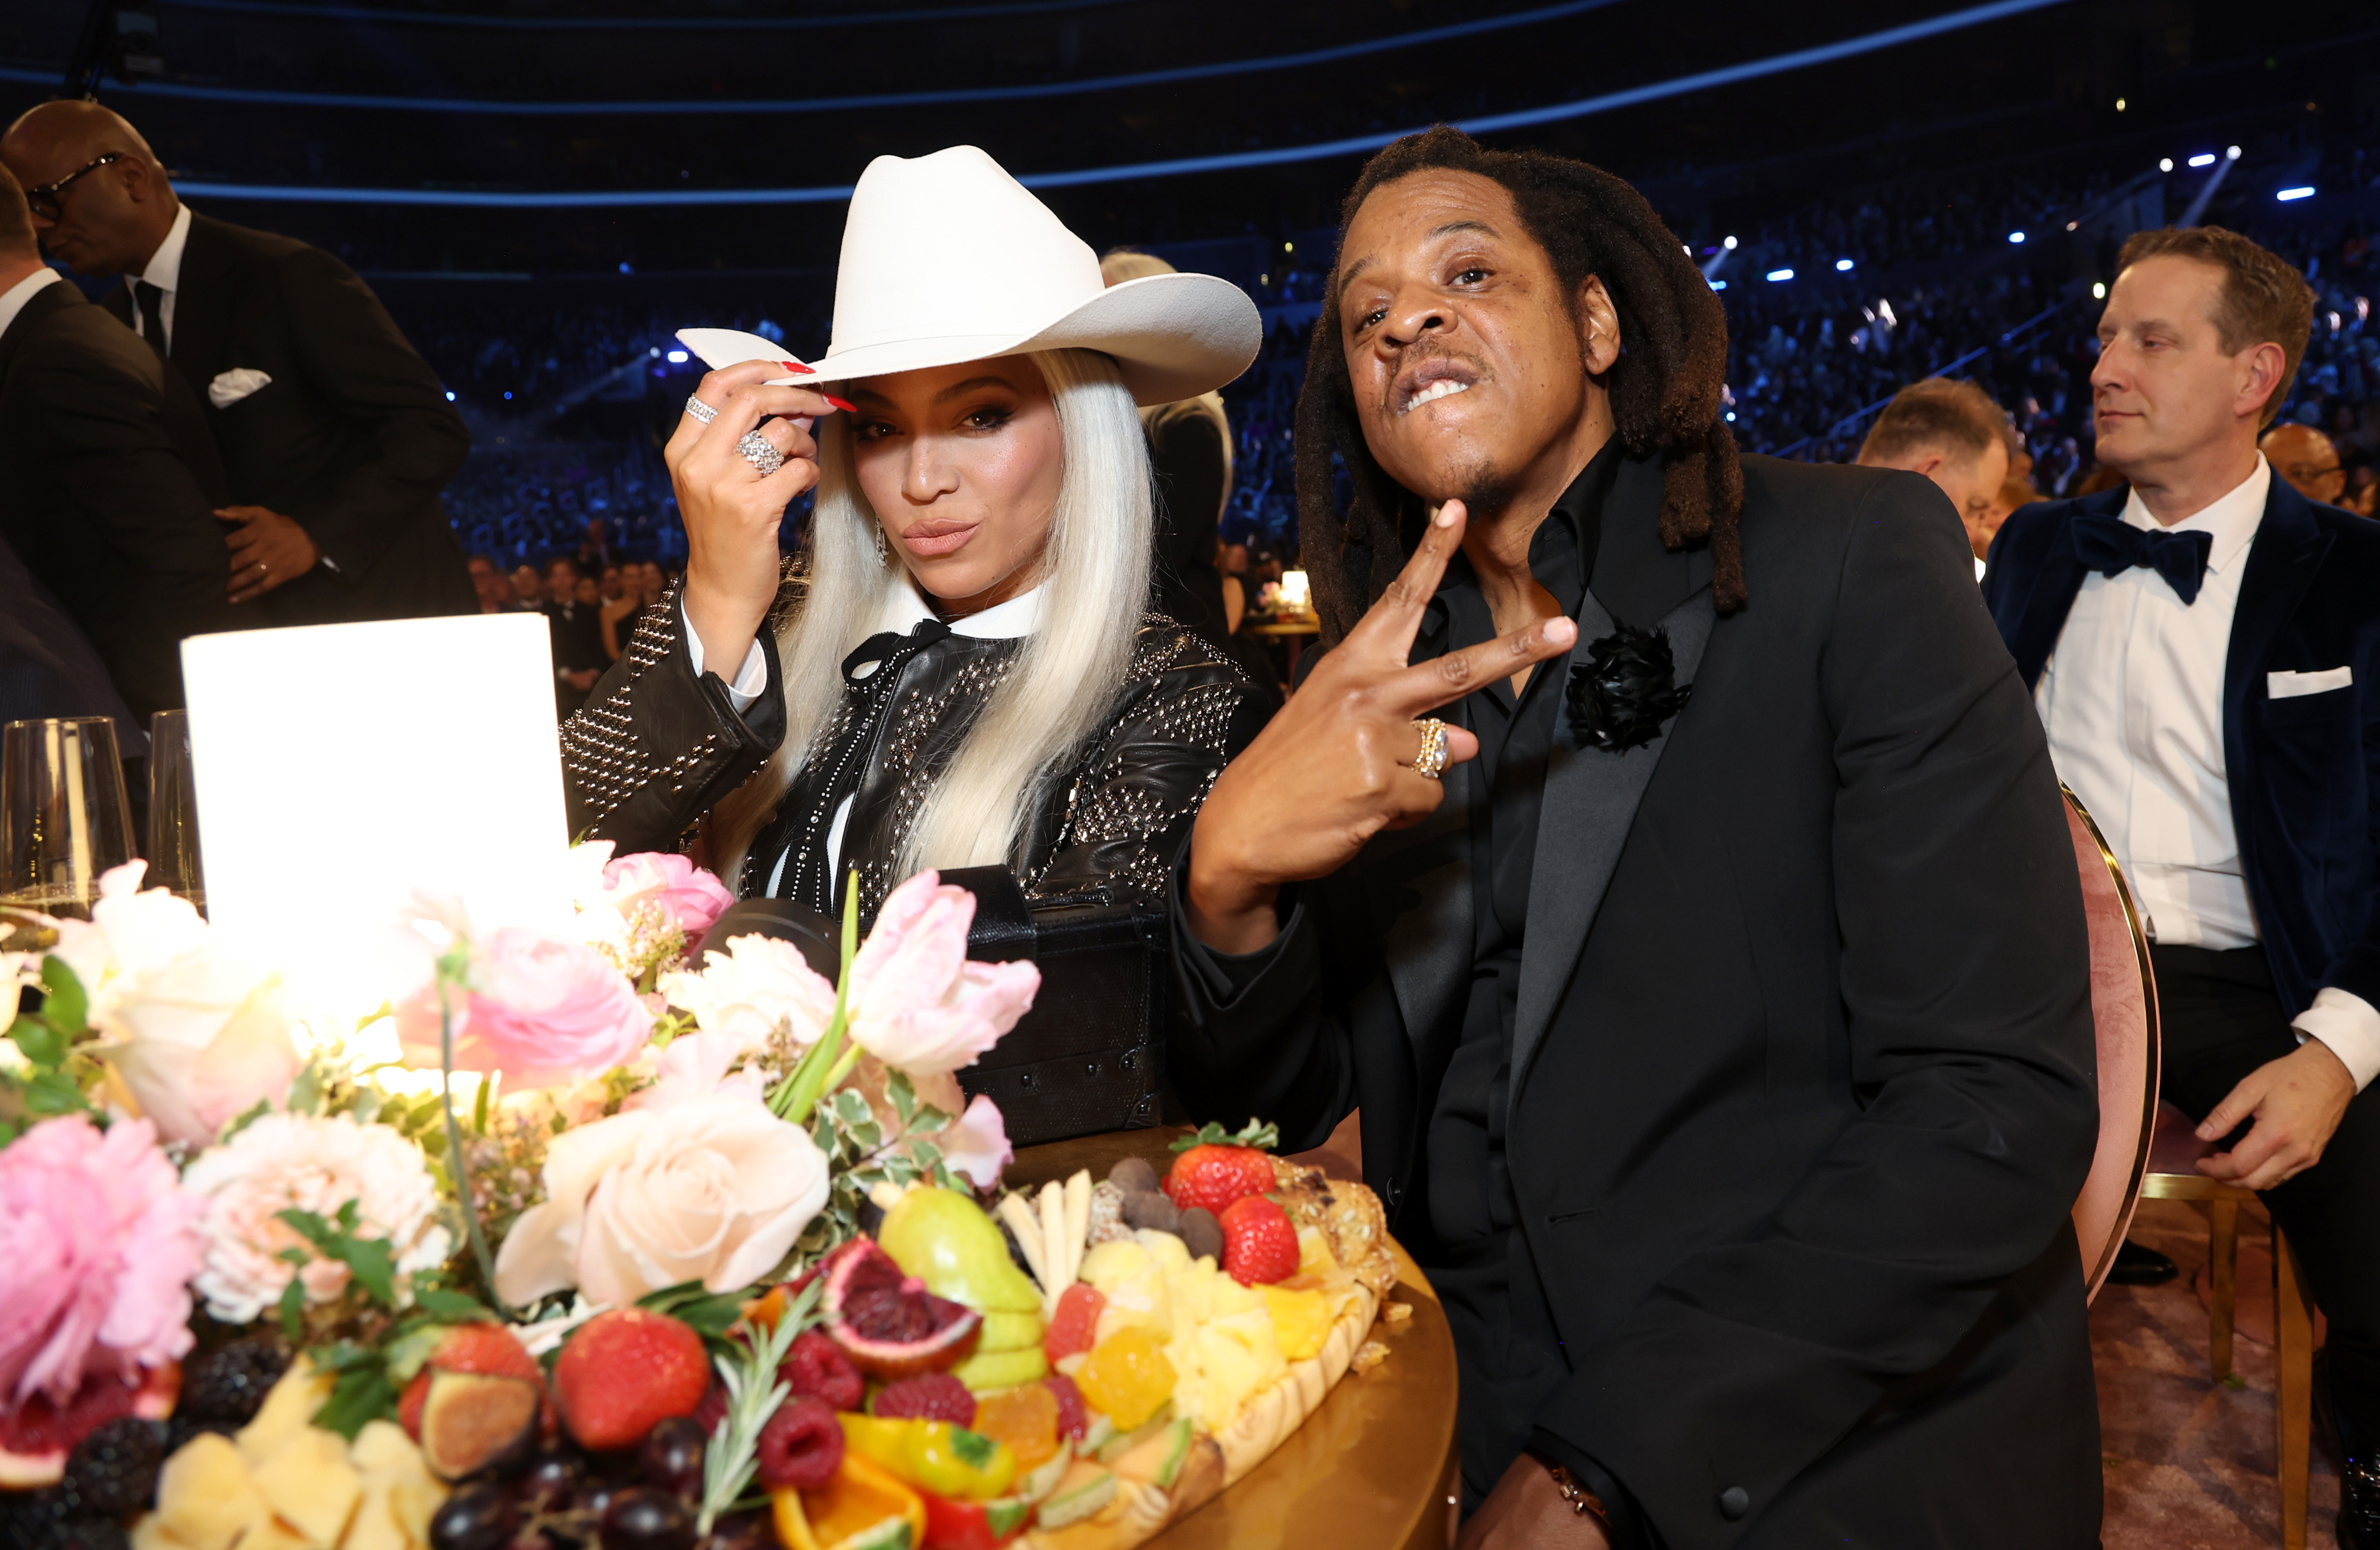 Beyoncé in a Western-style hat with Jay-Z at a table